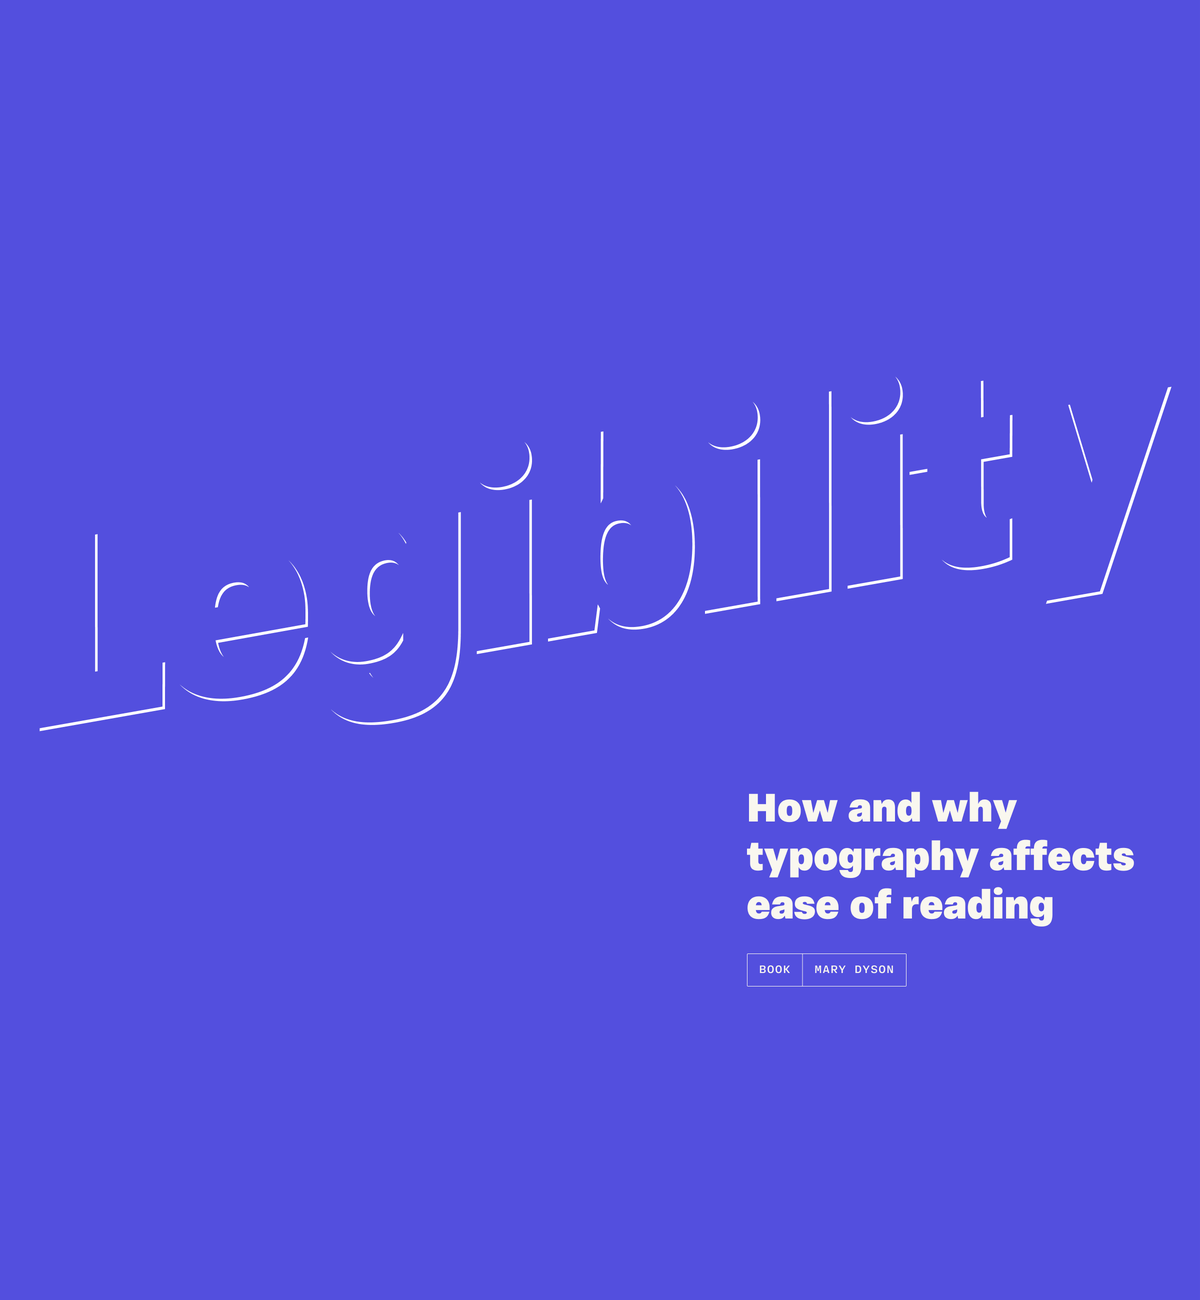 More information about "Legibility: how and why typography affects ease of reading"